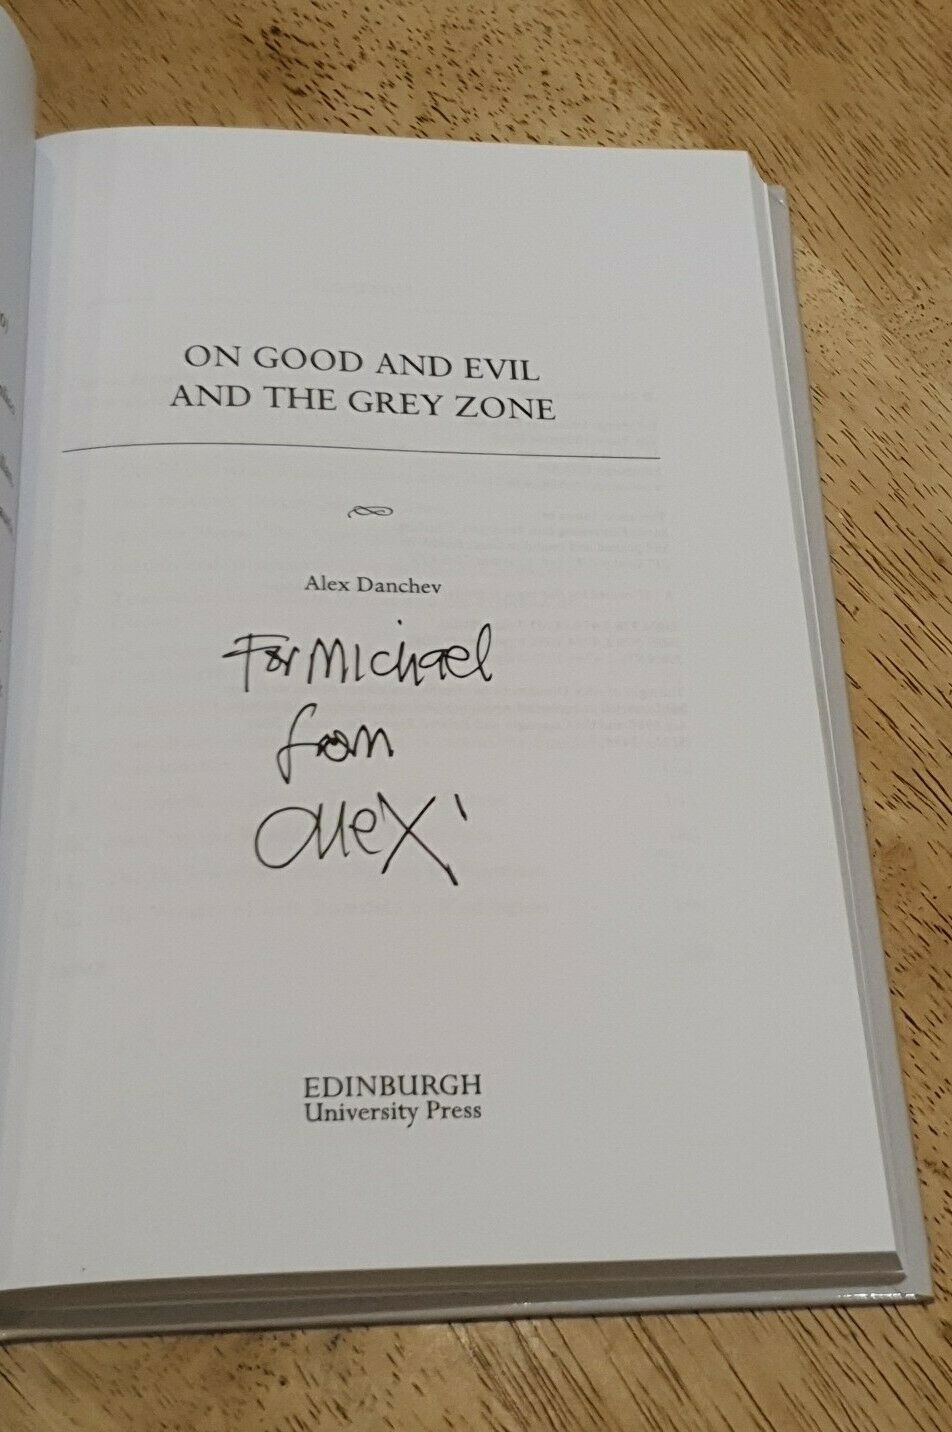 SIGNED On Good and Evil and the Grey Zone by Alex Danchev